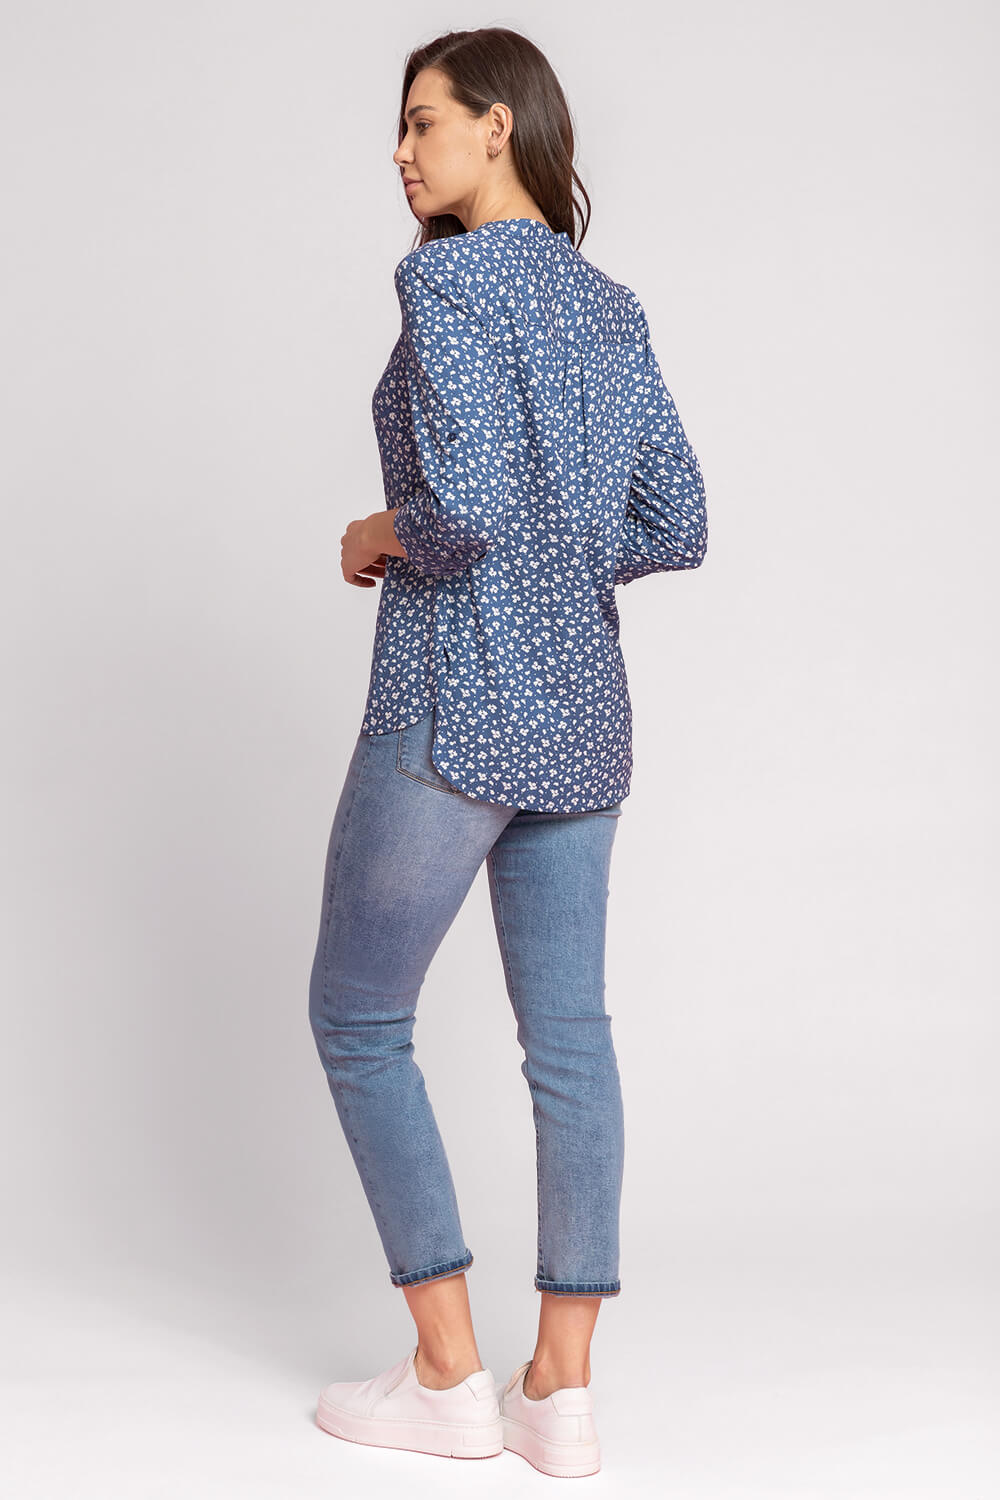 Blue Ditsy Floral Print Notch Neck Top, Image 2 of 5